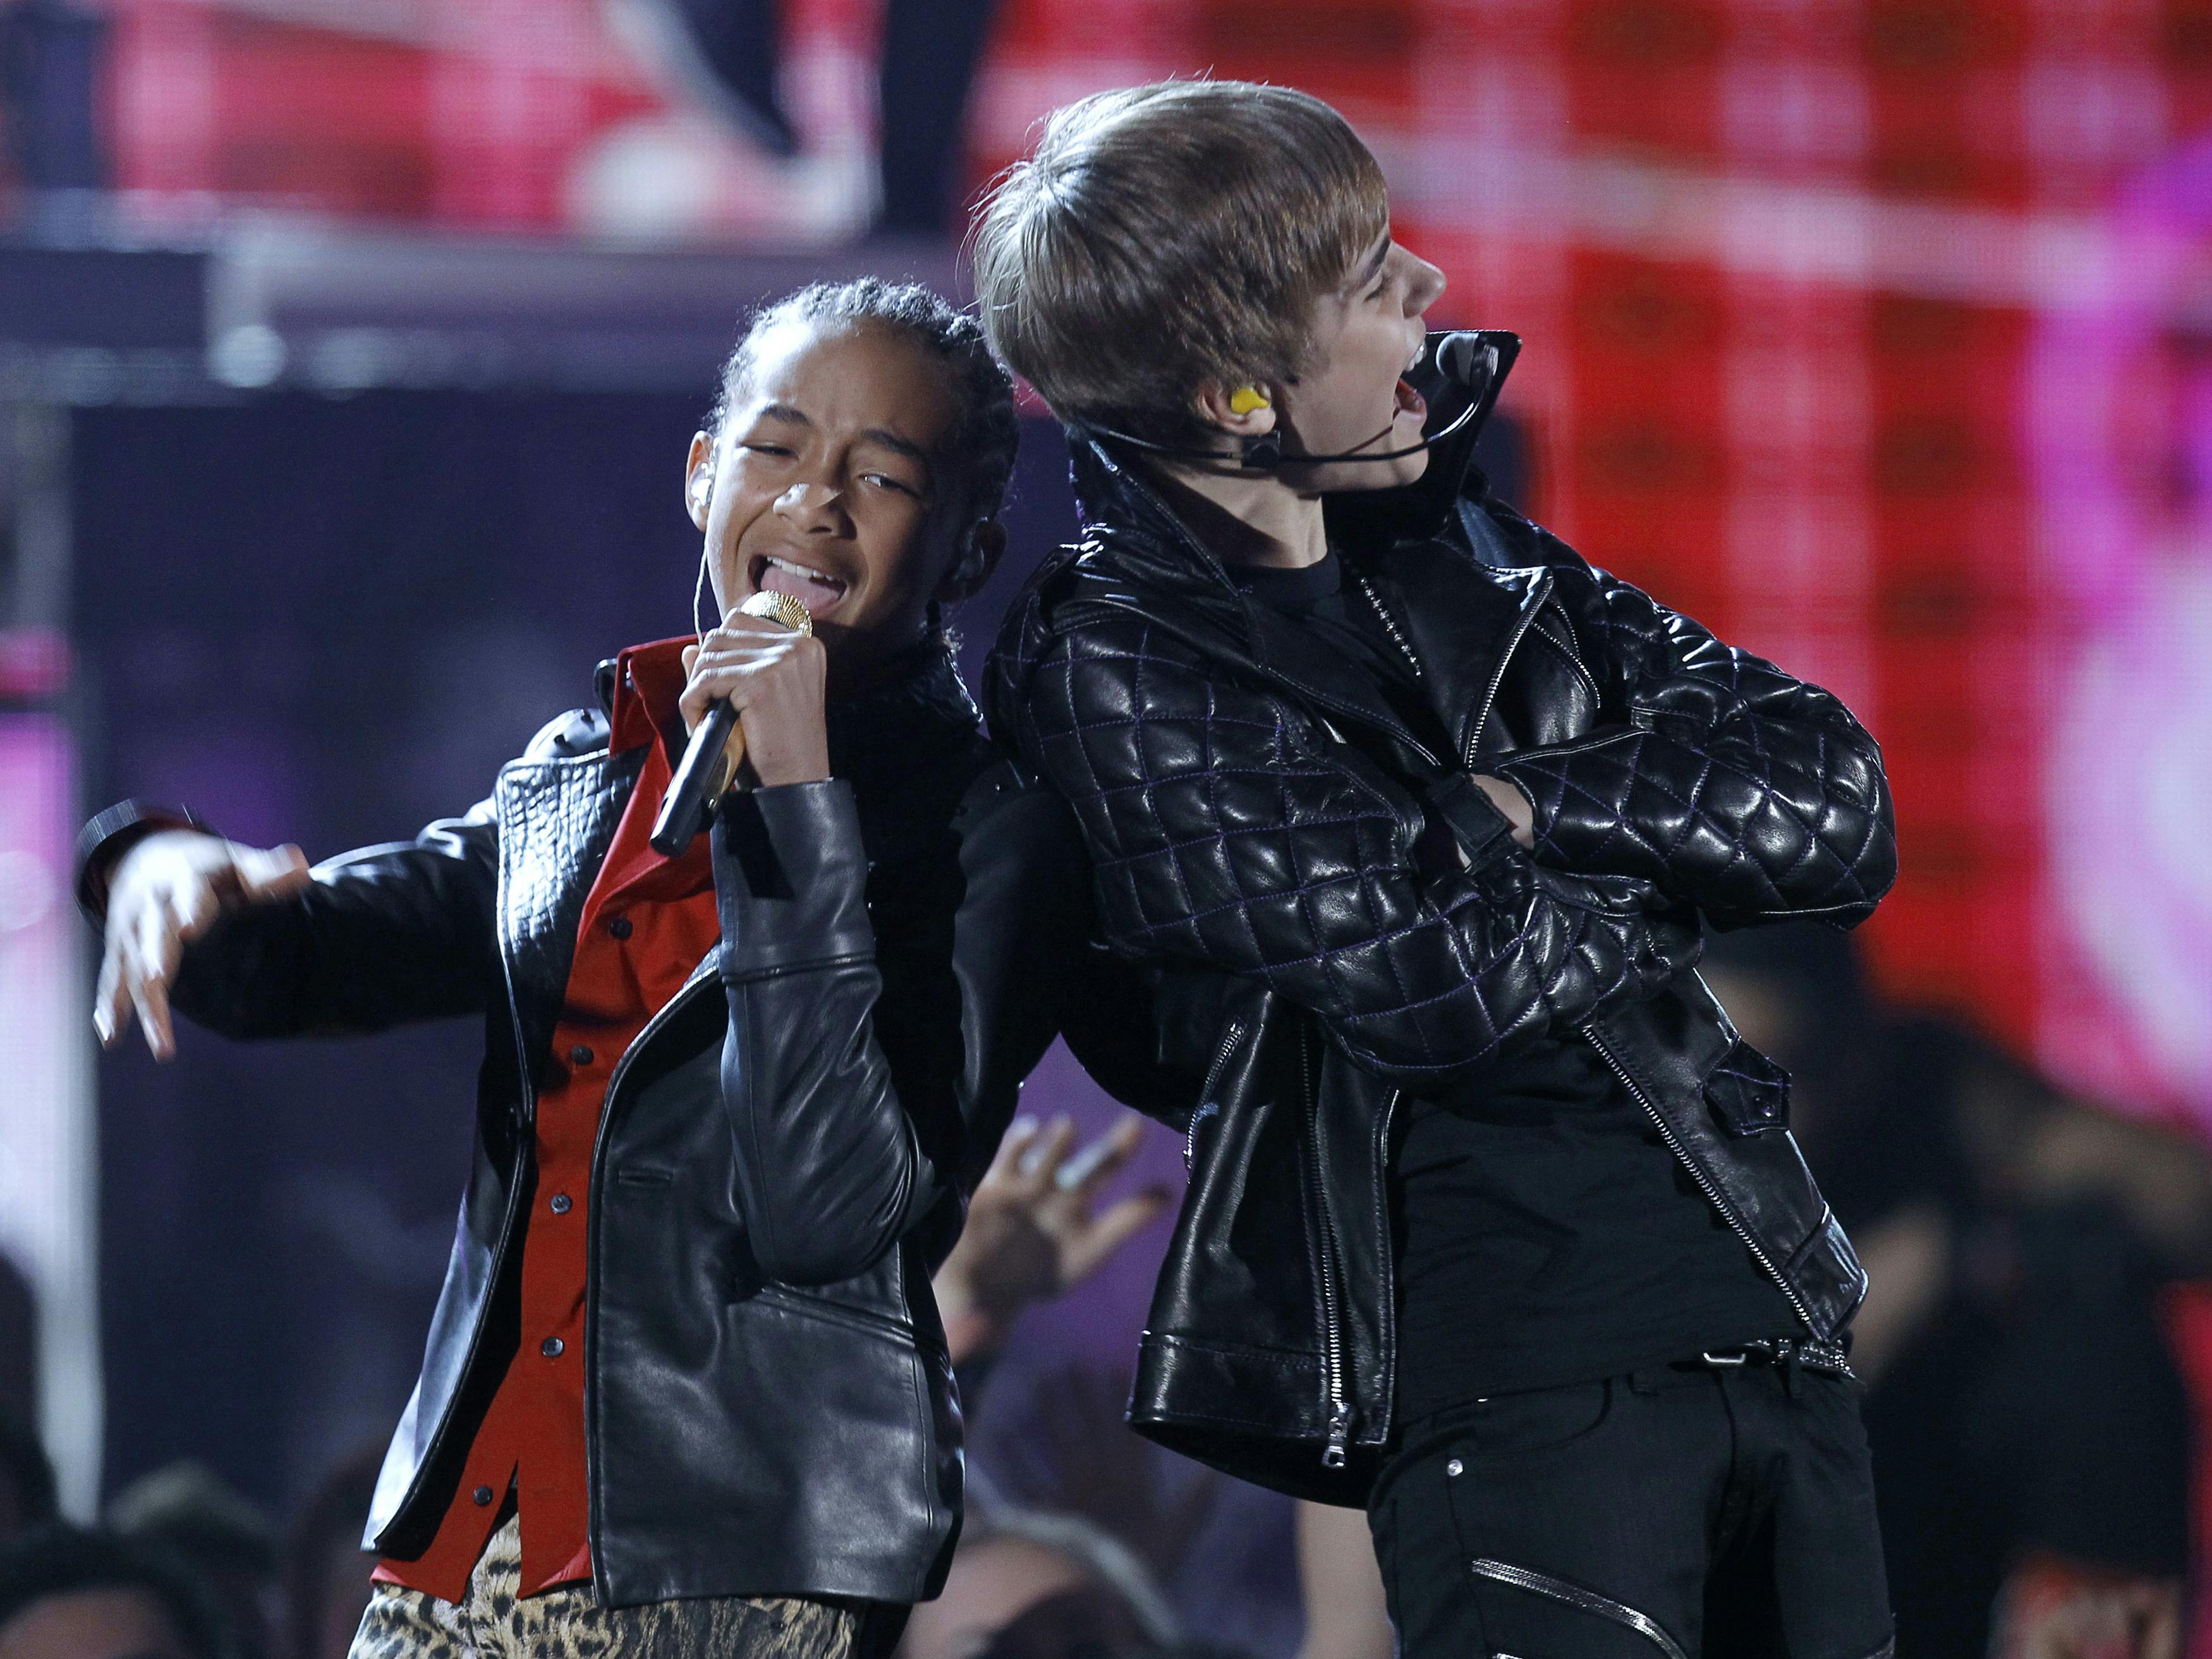 Jaden Smith (L) and Justin Bieber perform "Never Say Never" at the 53rd annual Grammy Awards in Los Angeles, California February 13, 2011. REUTERS/Lucy Nicholson (UNITED STATES - Tags: ENTERTAINMENT) (GRAMMYS-SHOW)